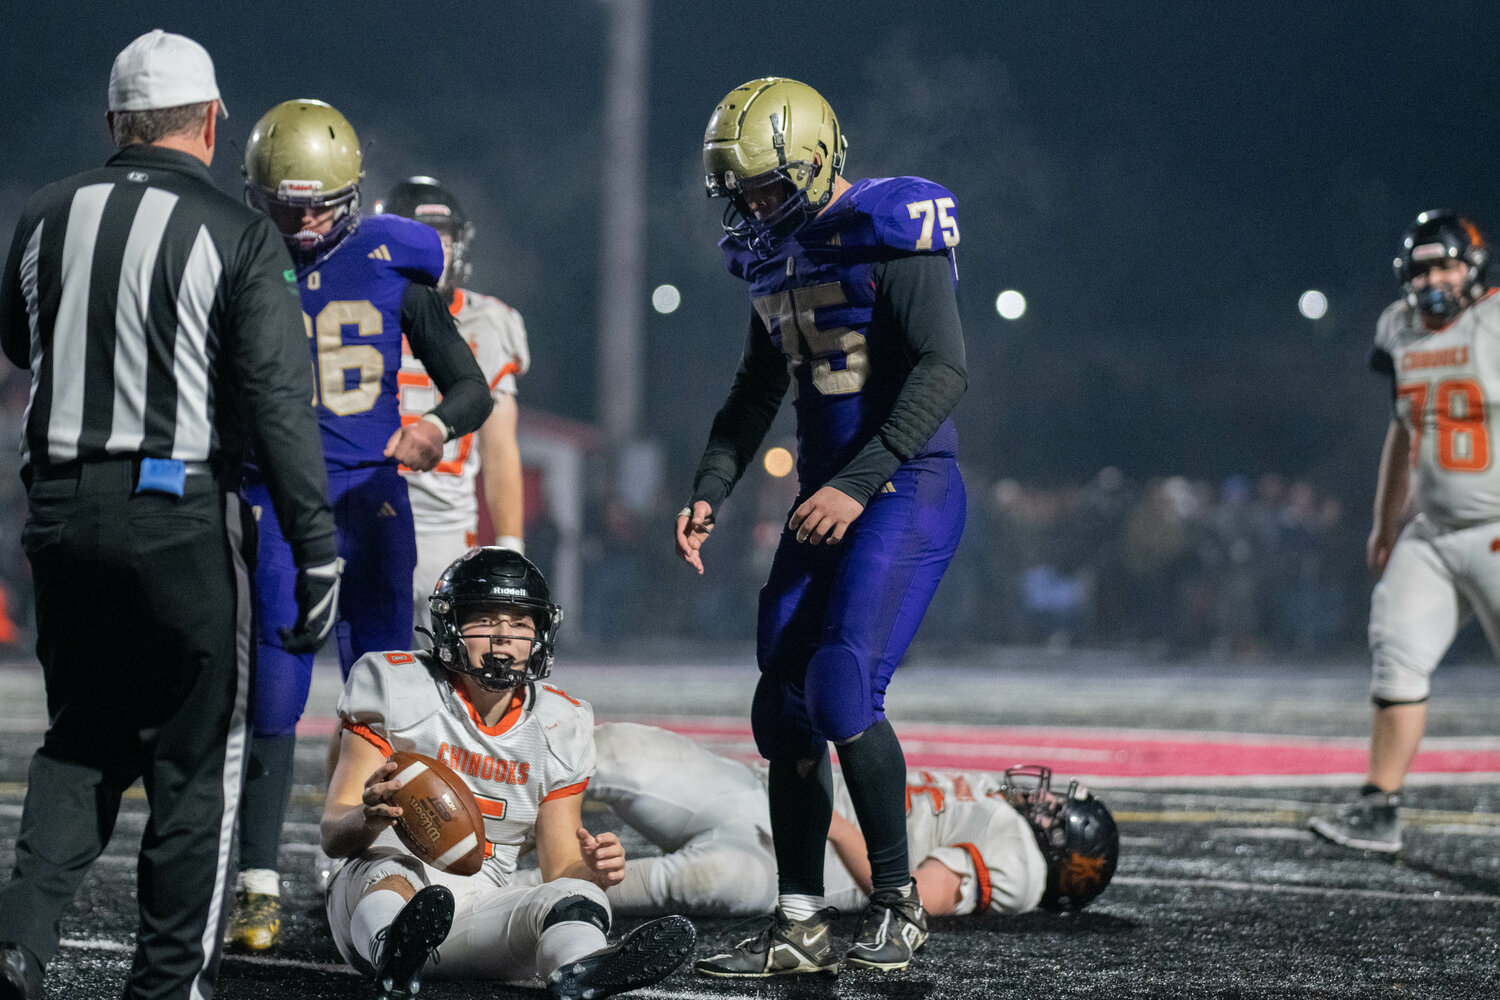 Rylan McGraw stands over Kalama quarterback Aiden Brown after a foirth-down stop in the second half of Onalaska's 60-40 win over the Chinooks in the 2B quarterfinals, Nov. 17 in Tenino.